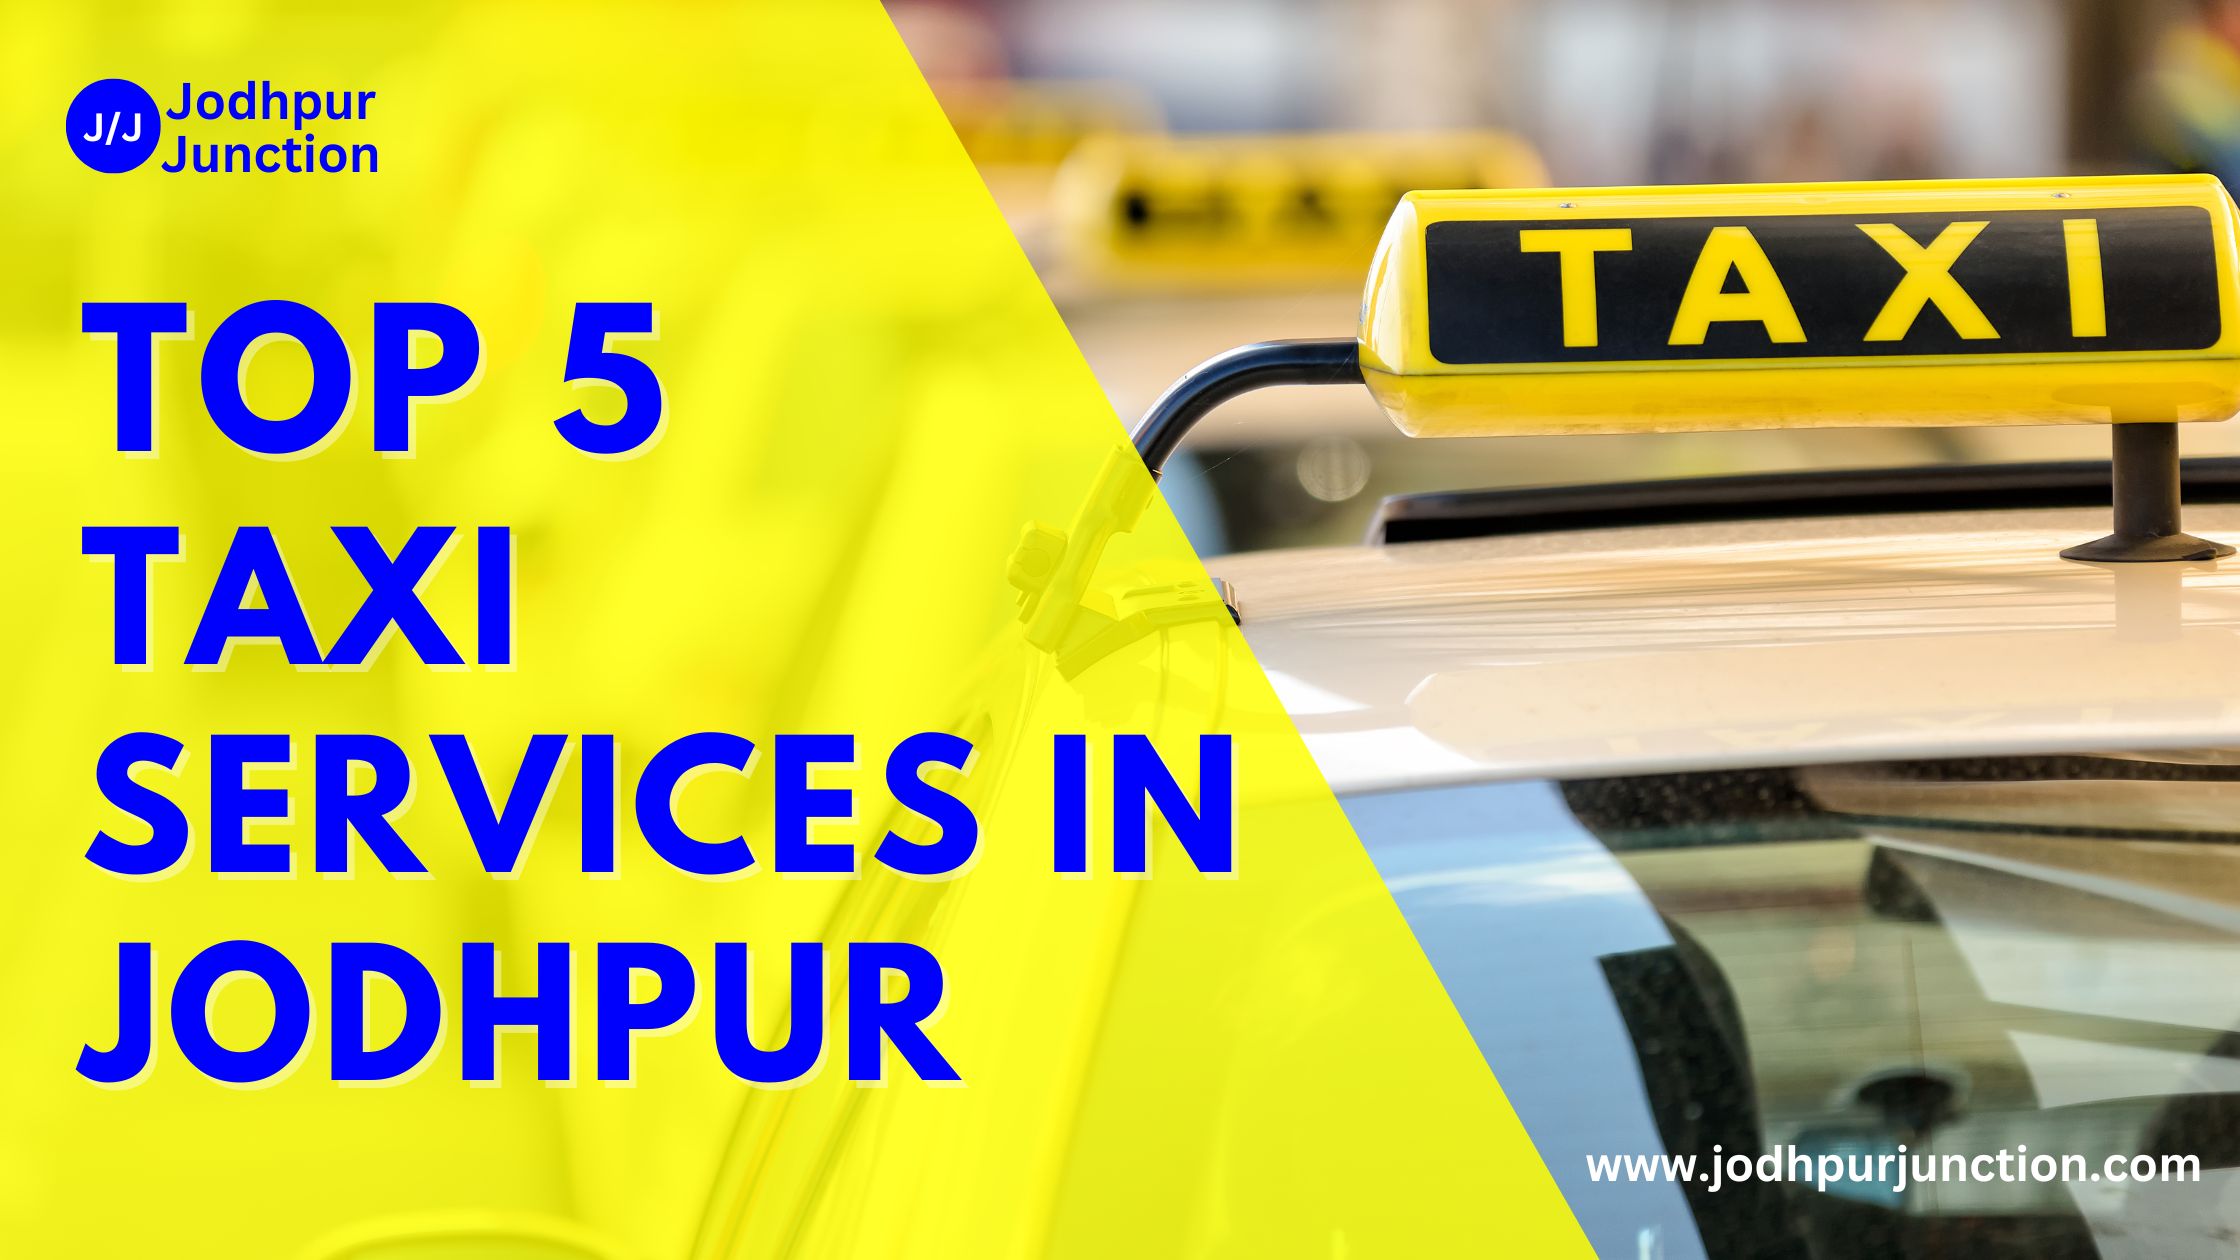 Top 5 Taxi Services in Jodhpur